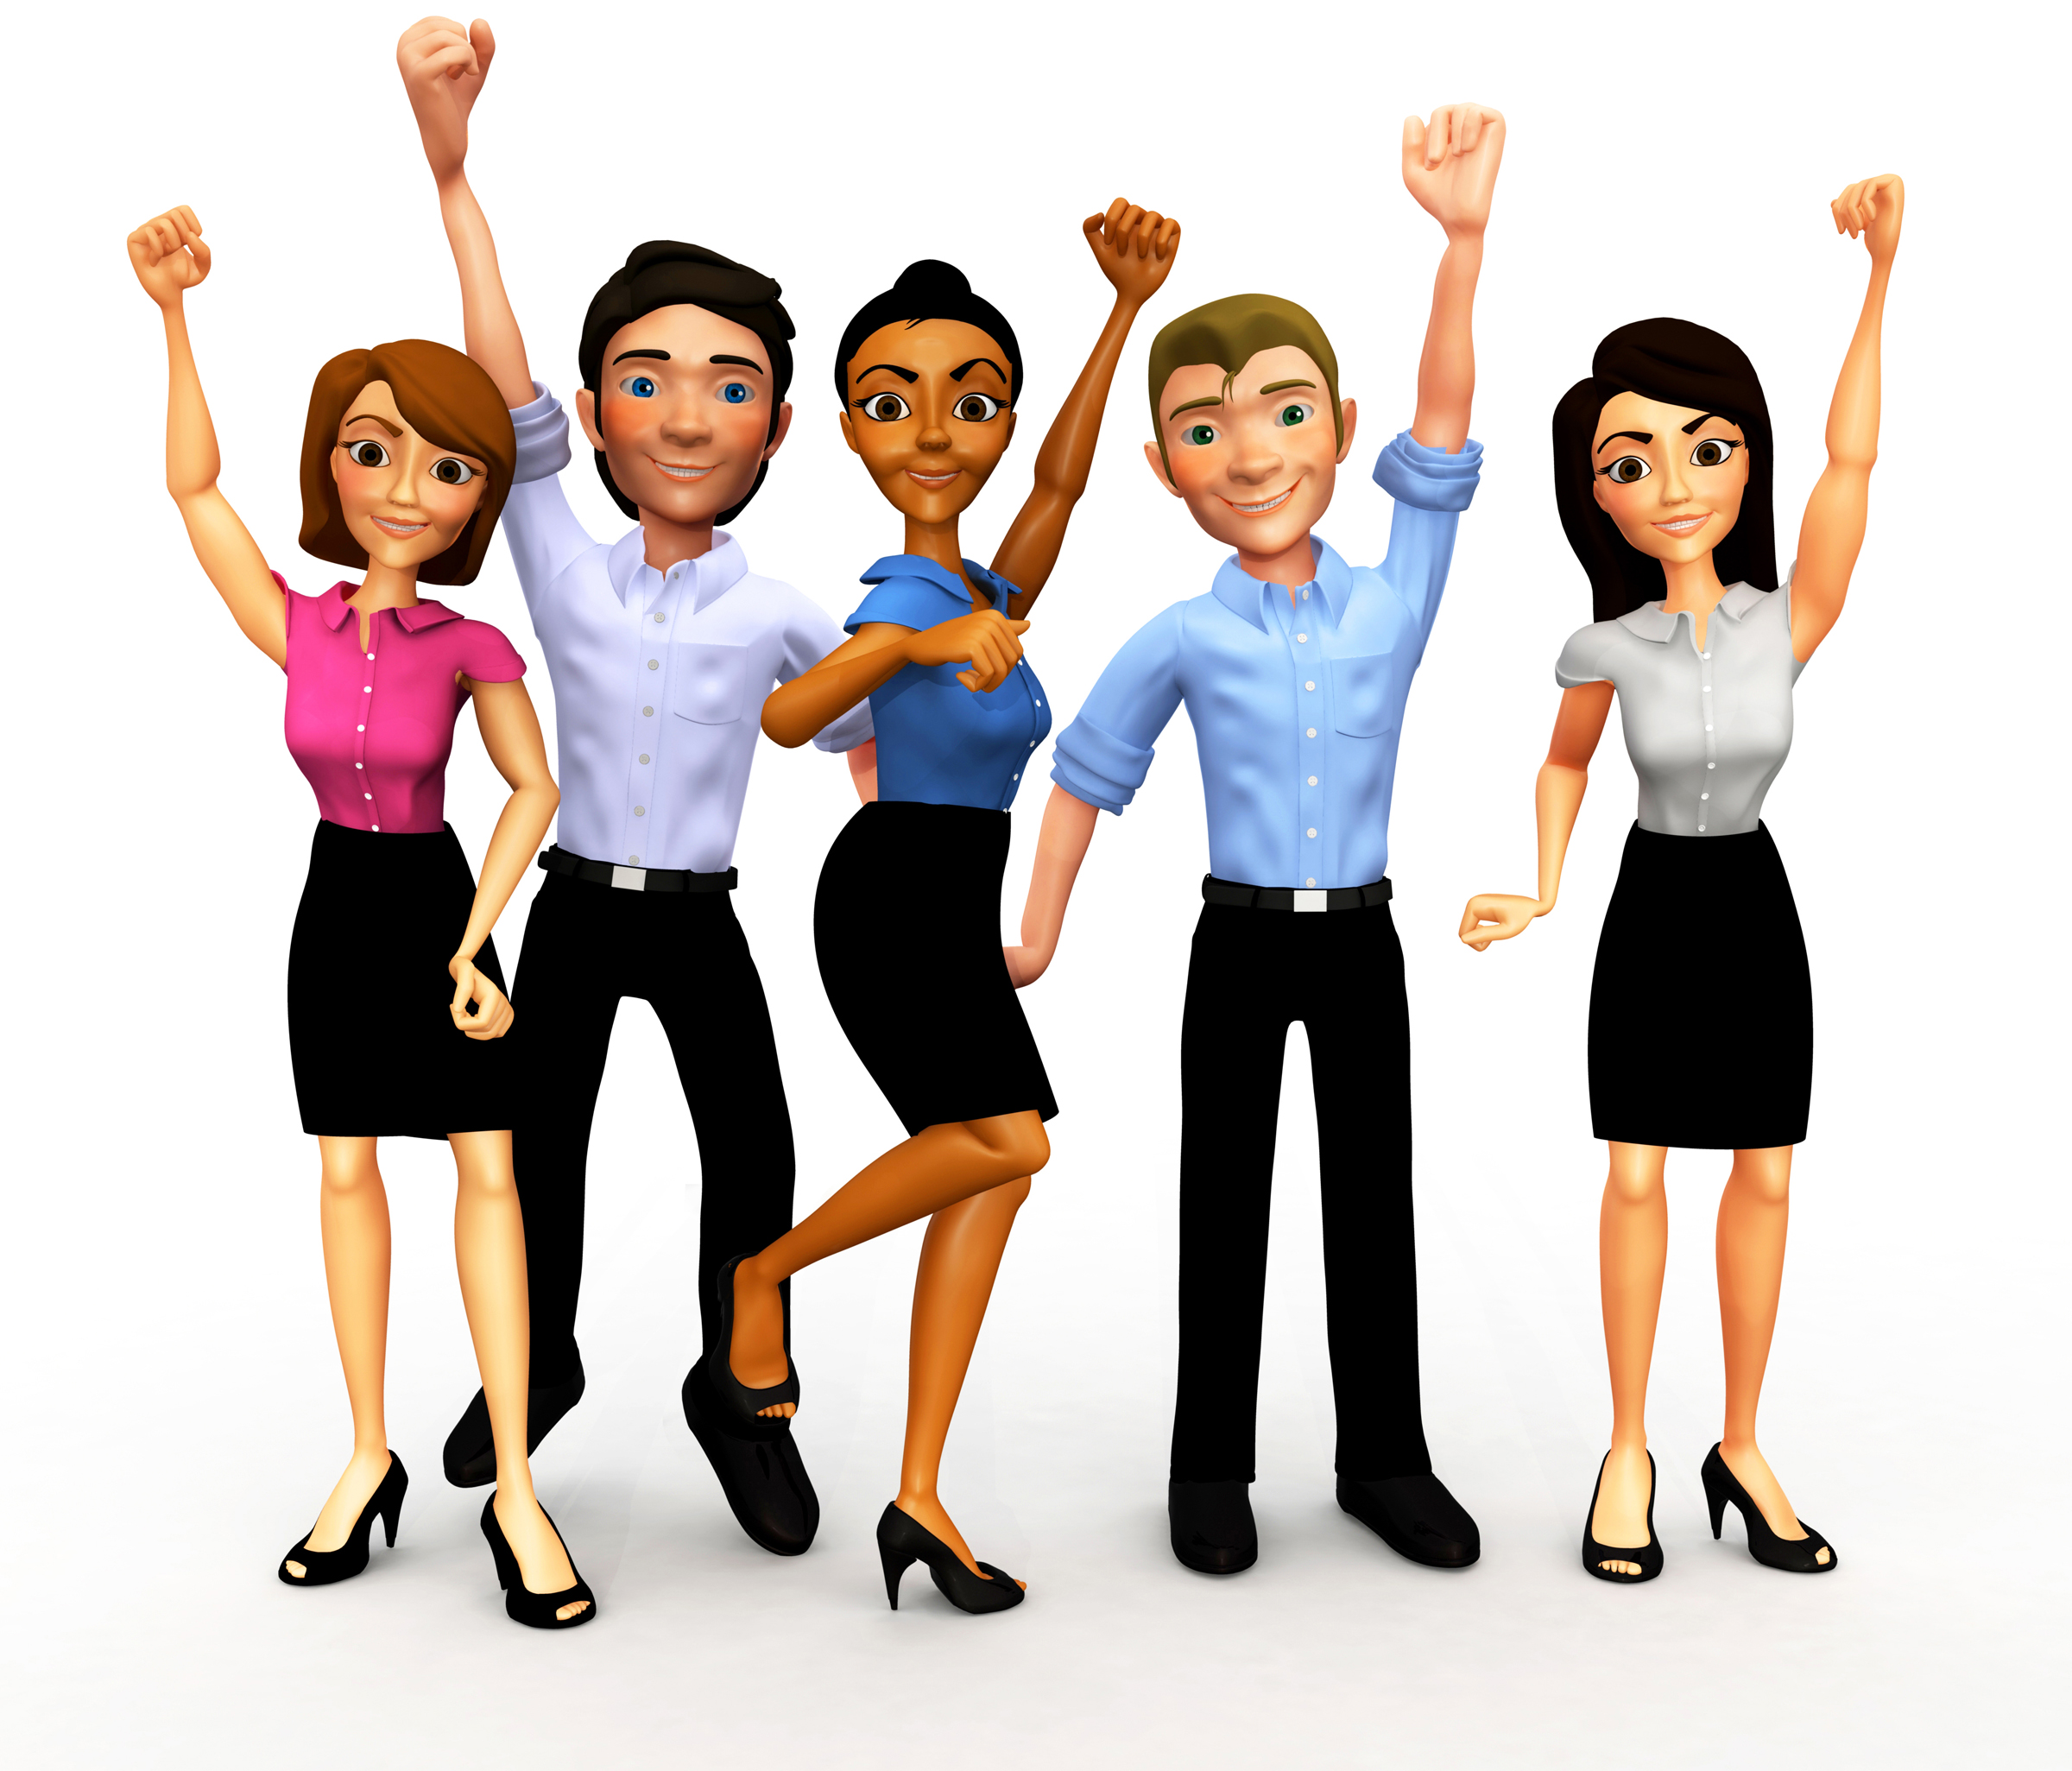 Group Of Happy People Clip Art | Clipart library - Free Clipart Images